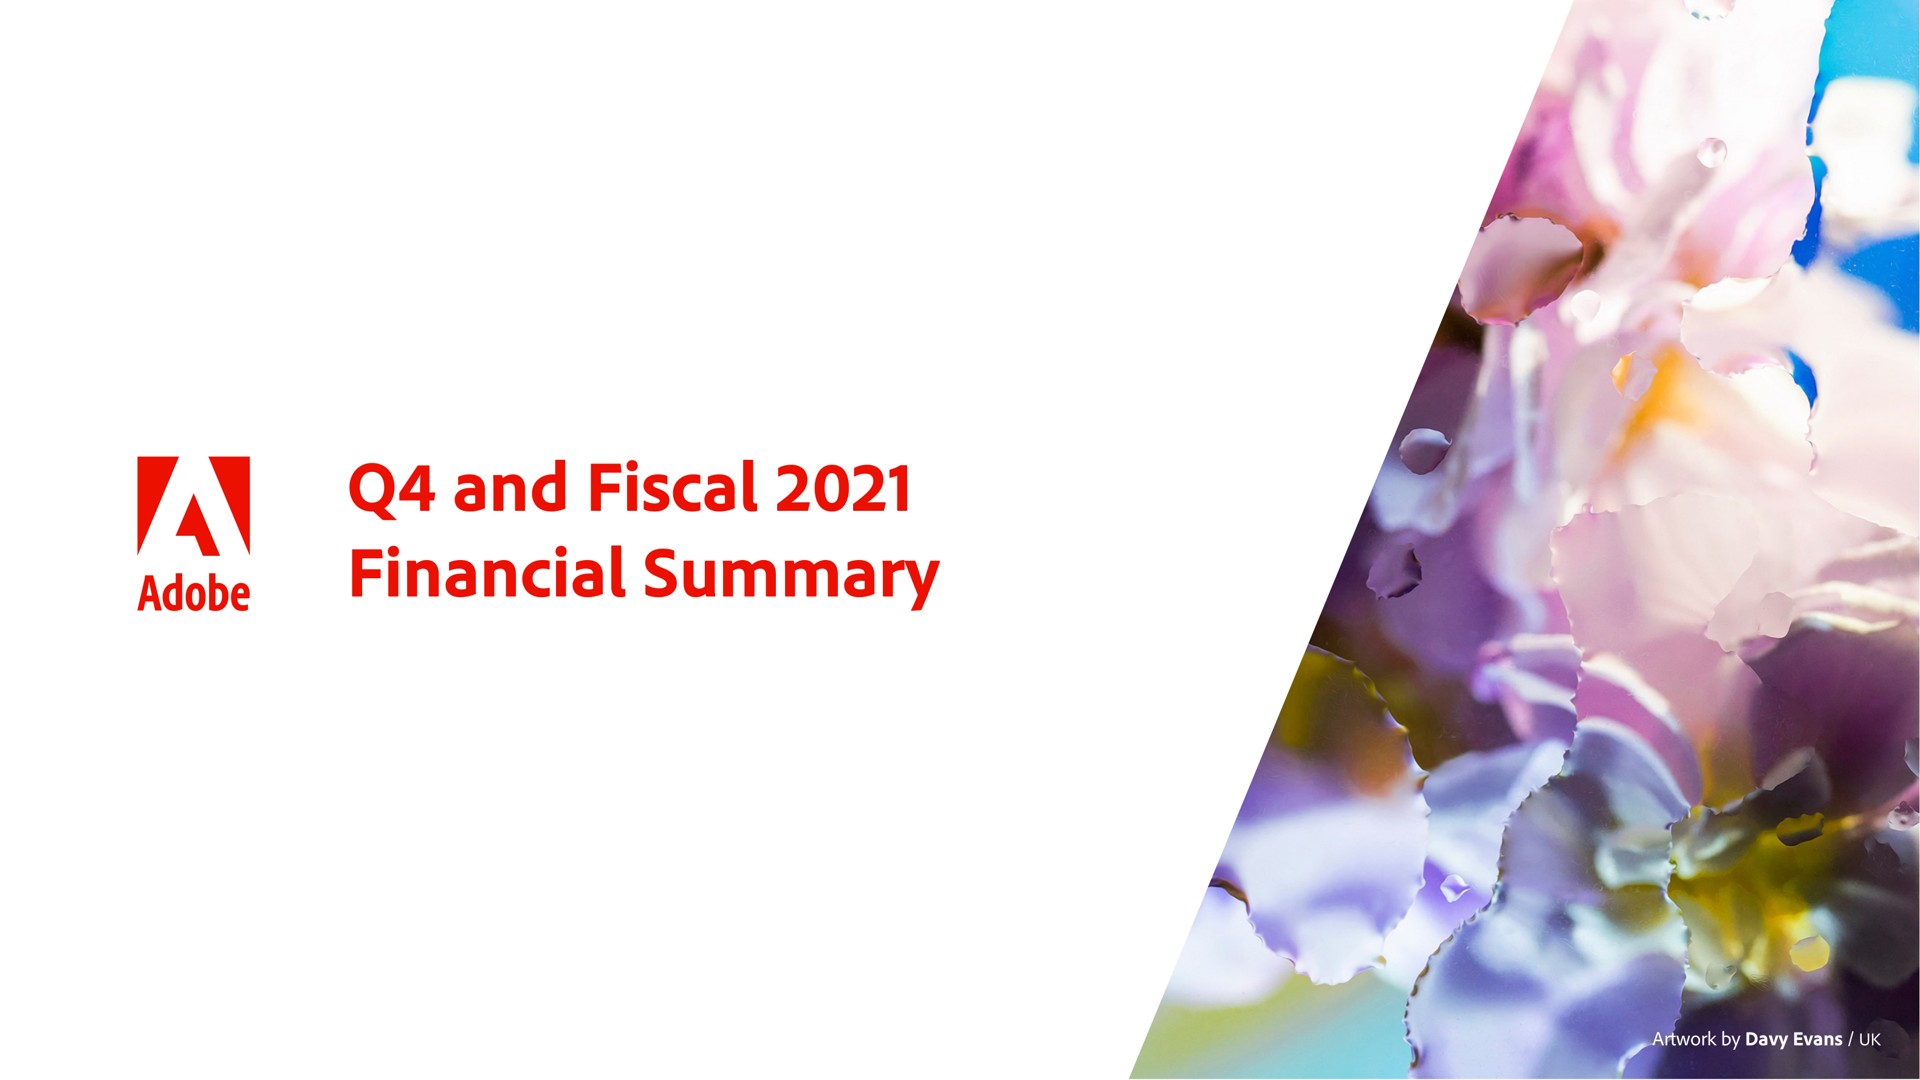 and fiscal financial summary adobe | Adobe